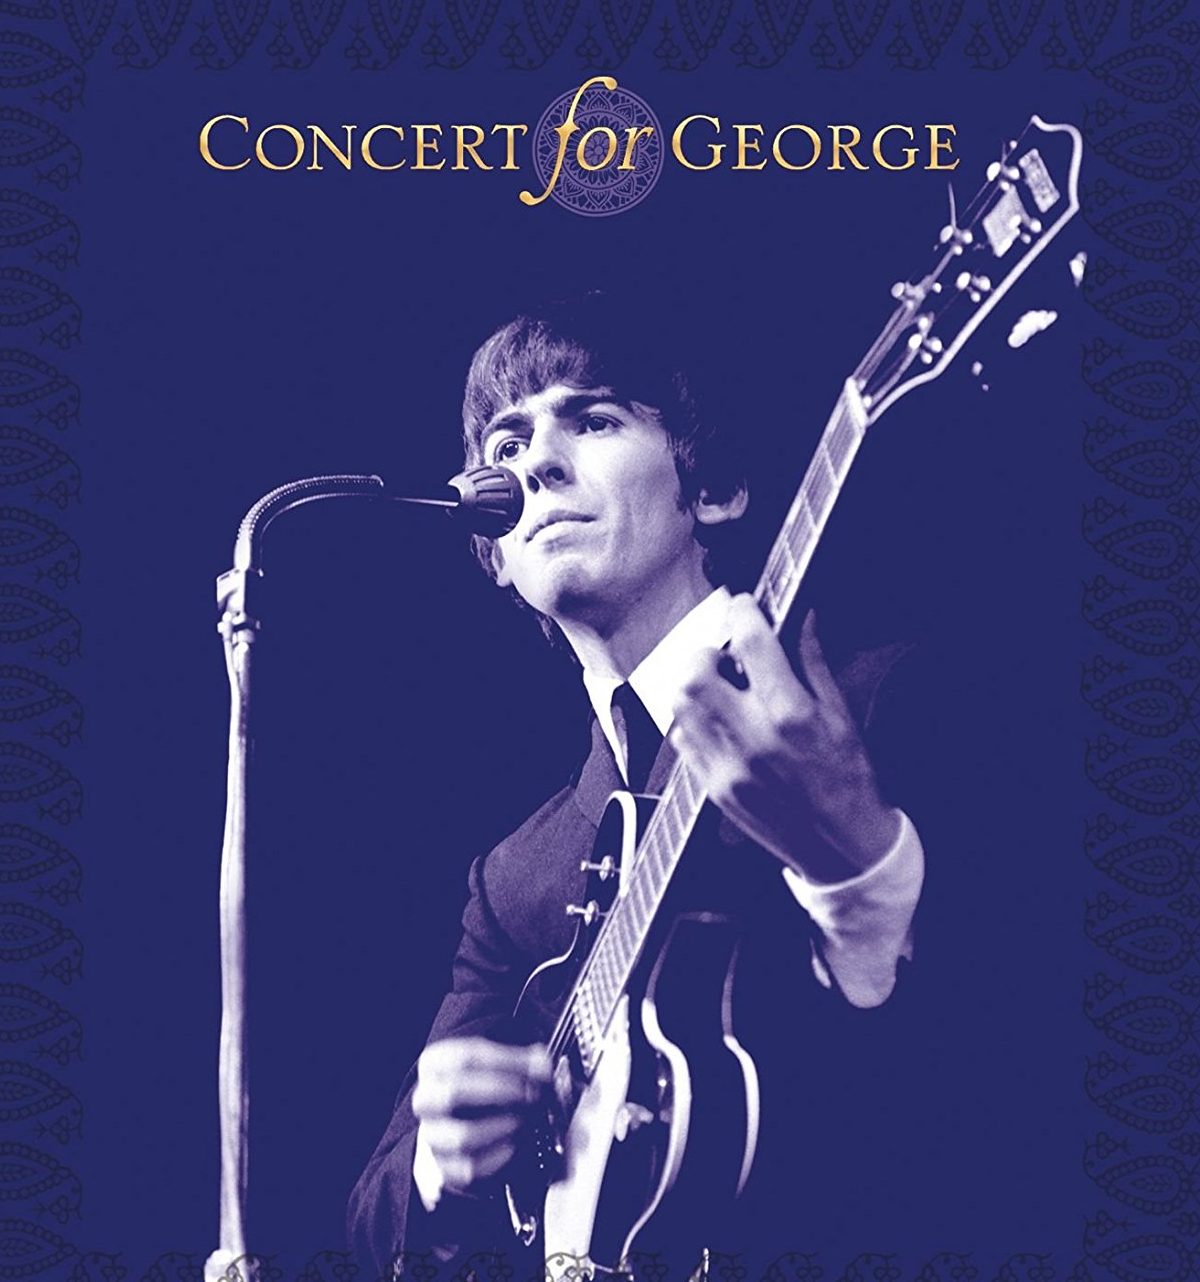 Concert For George: A Look Back at This Impressive Live George Harrison Tribute!